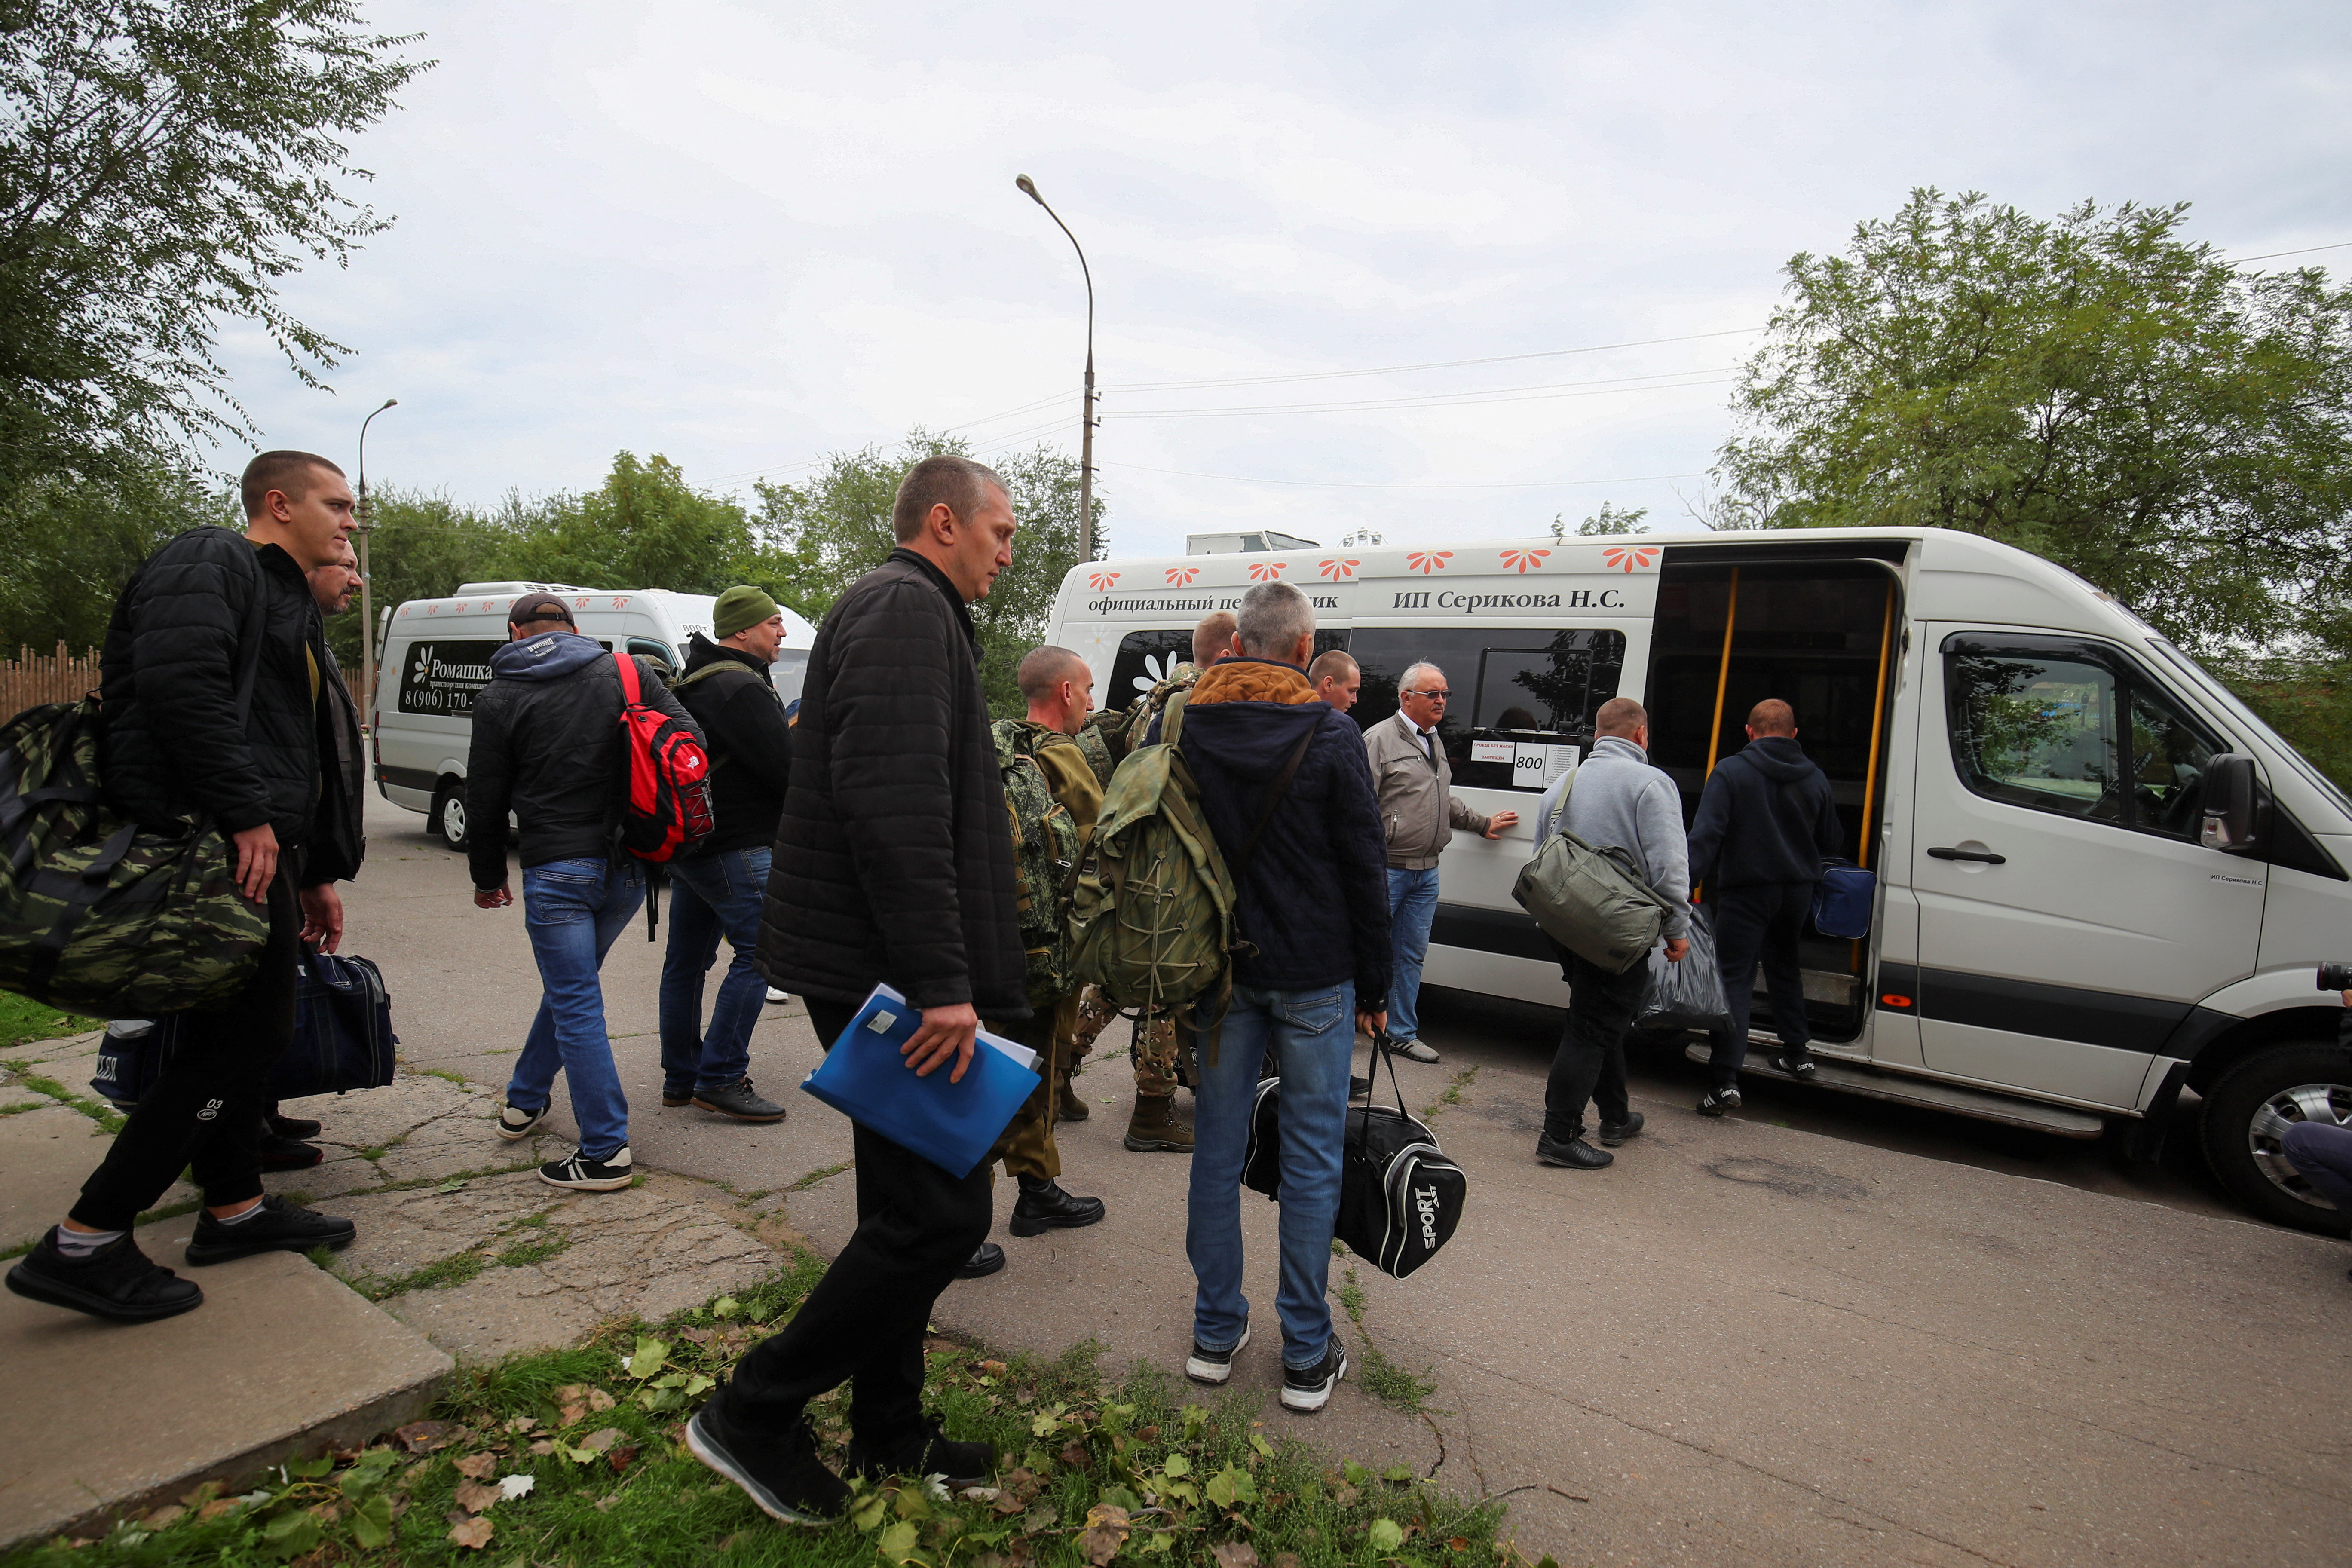 Russian reservists depart for military bases during mobilisation of troops in Volzhsky